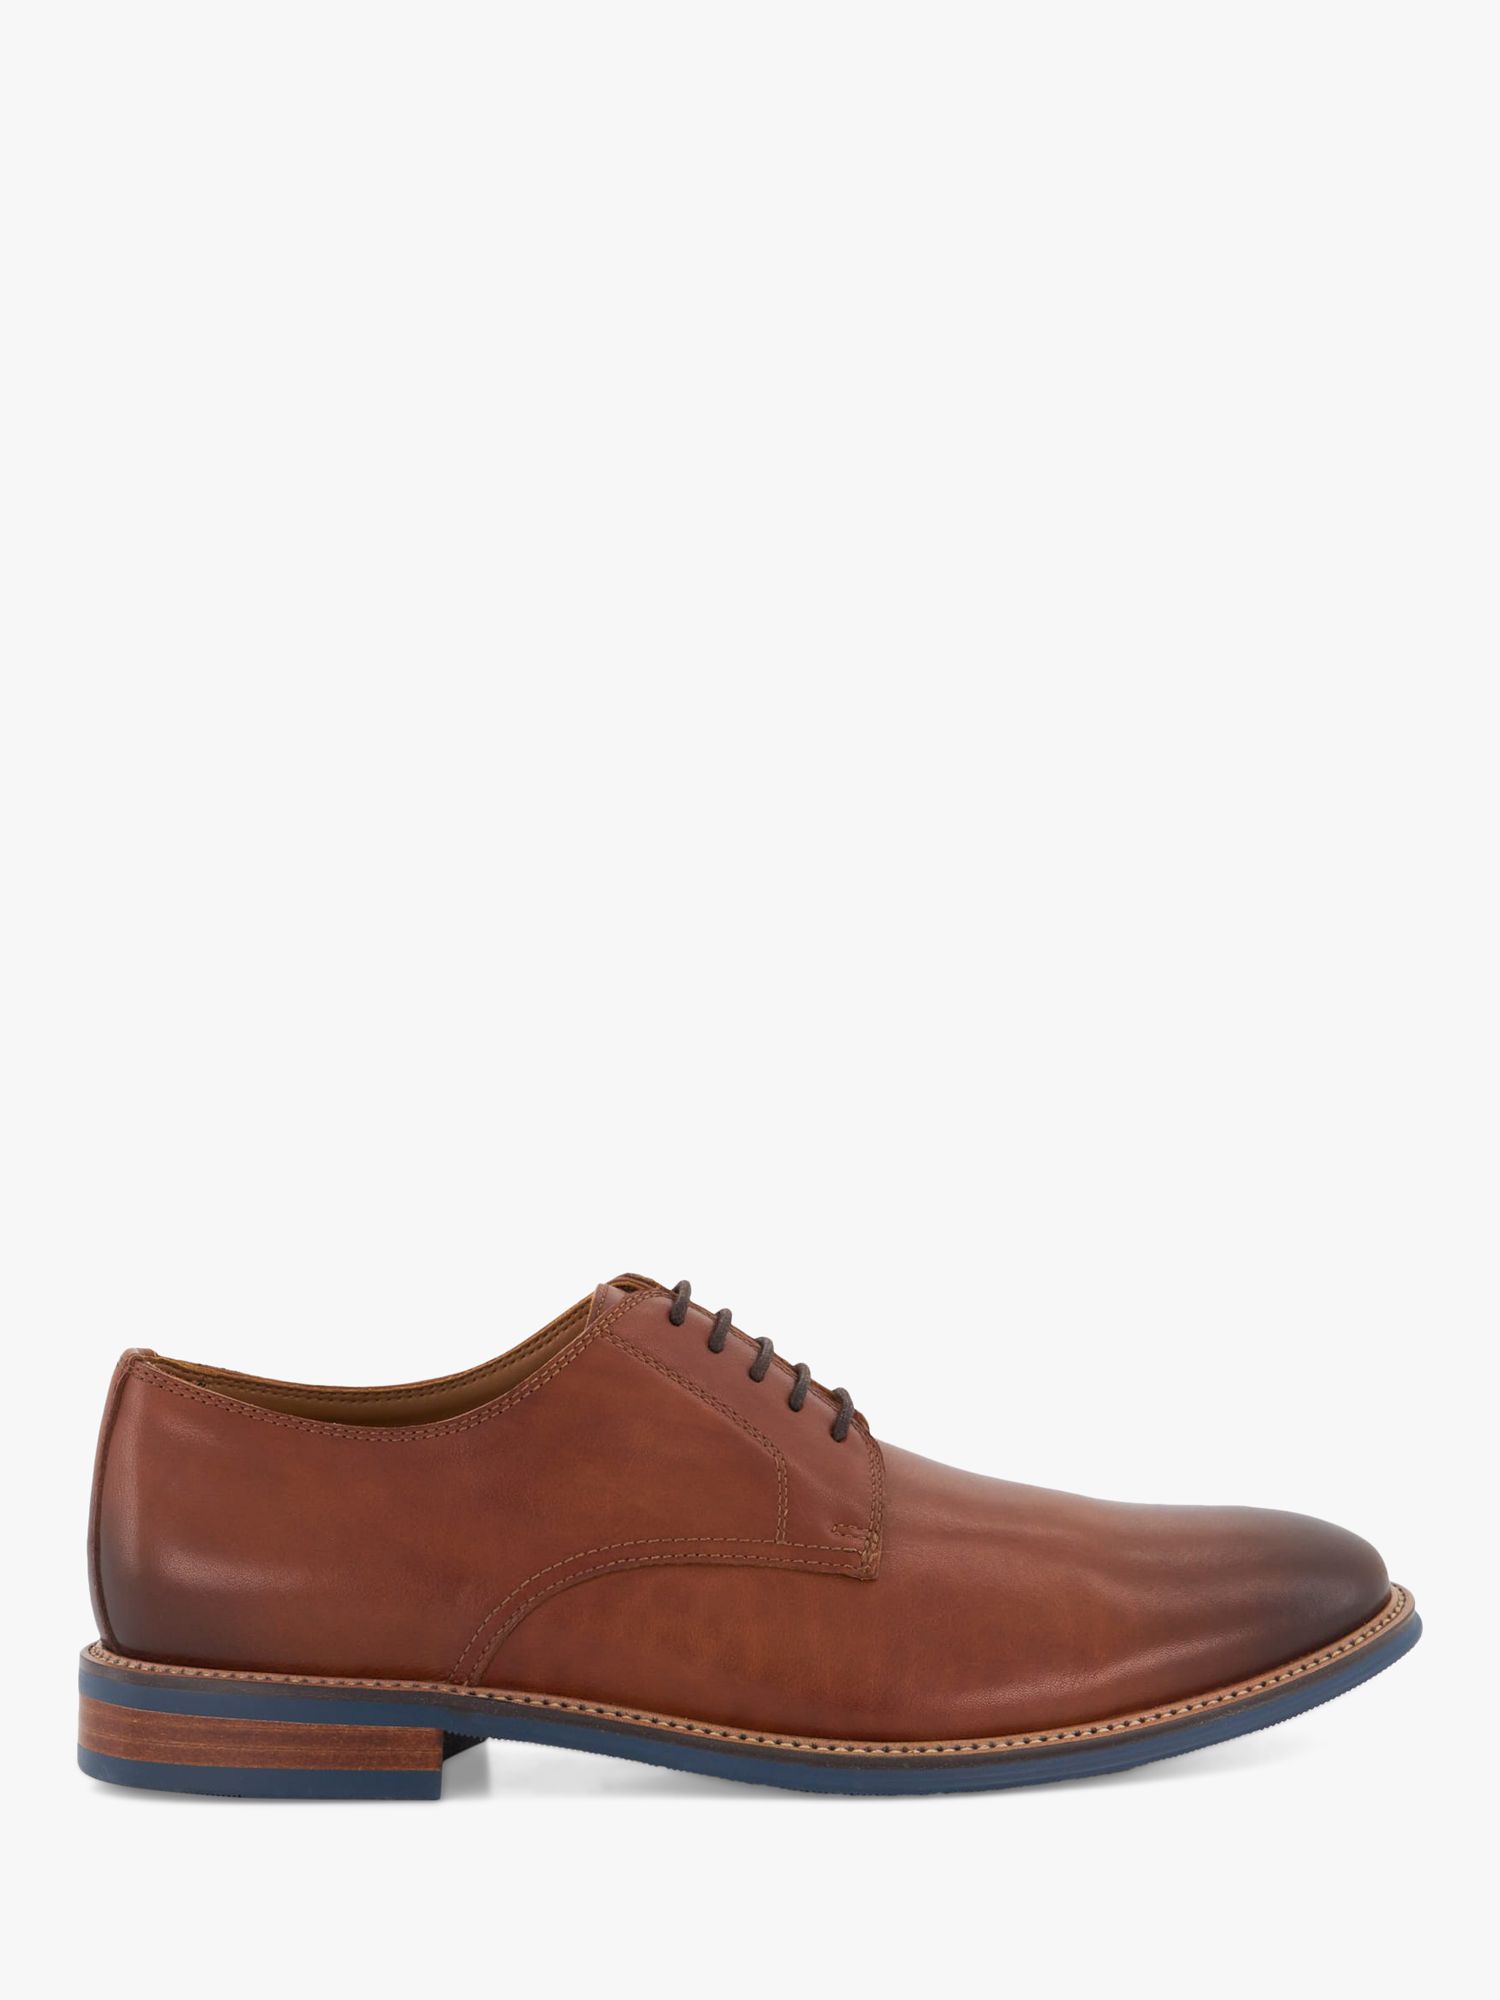 Dune Stanley Leather Derby Shoes, Tan-leather at John Lewis & Partners